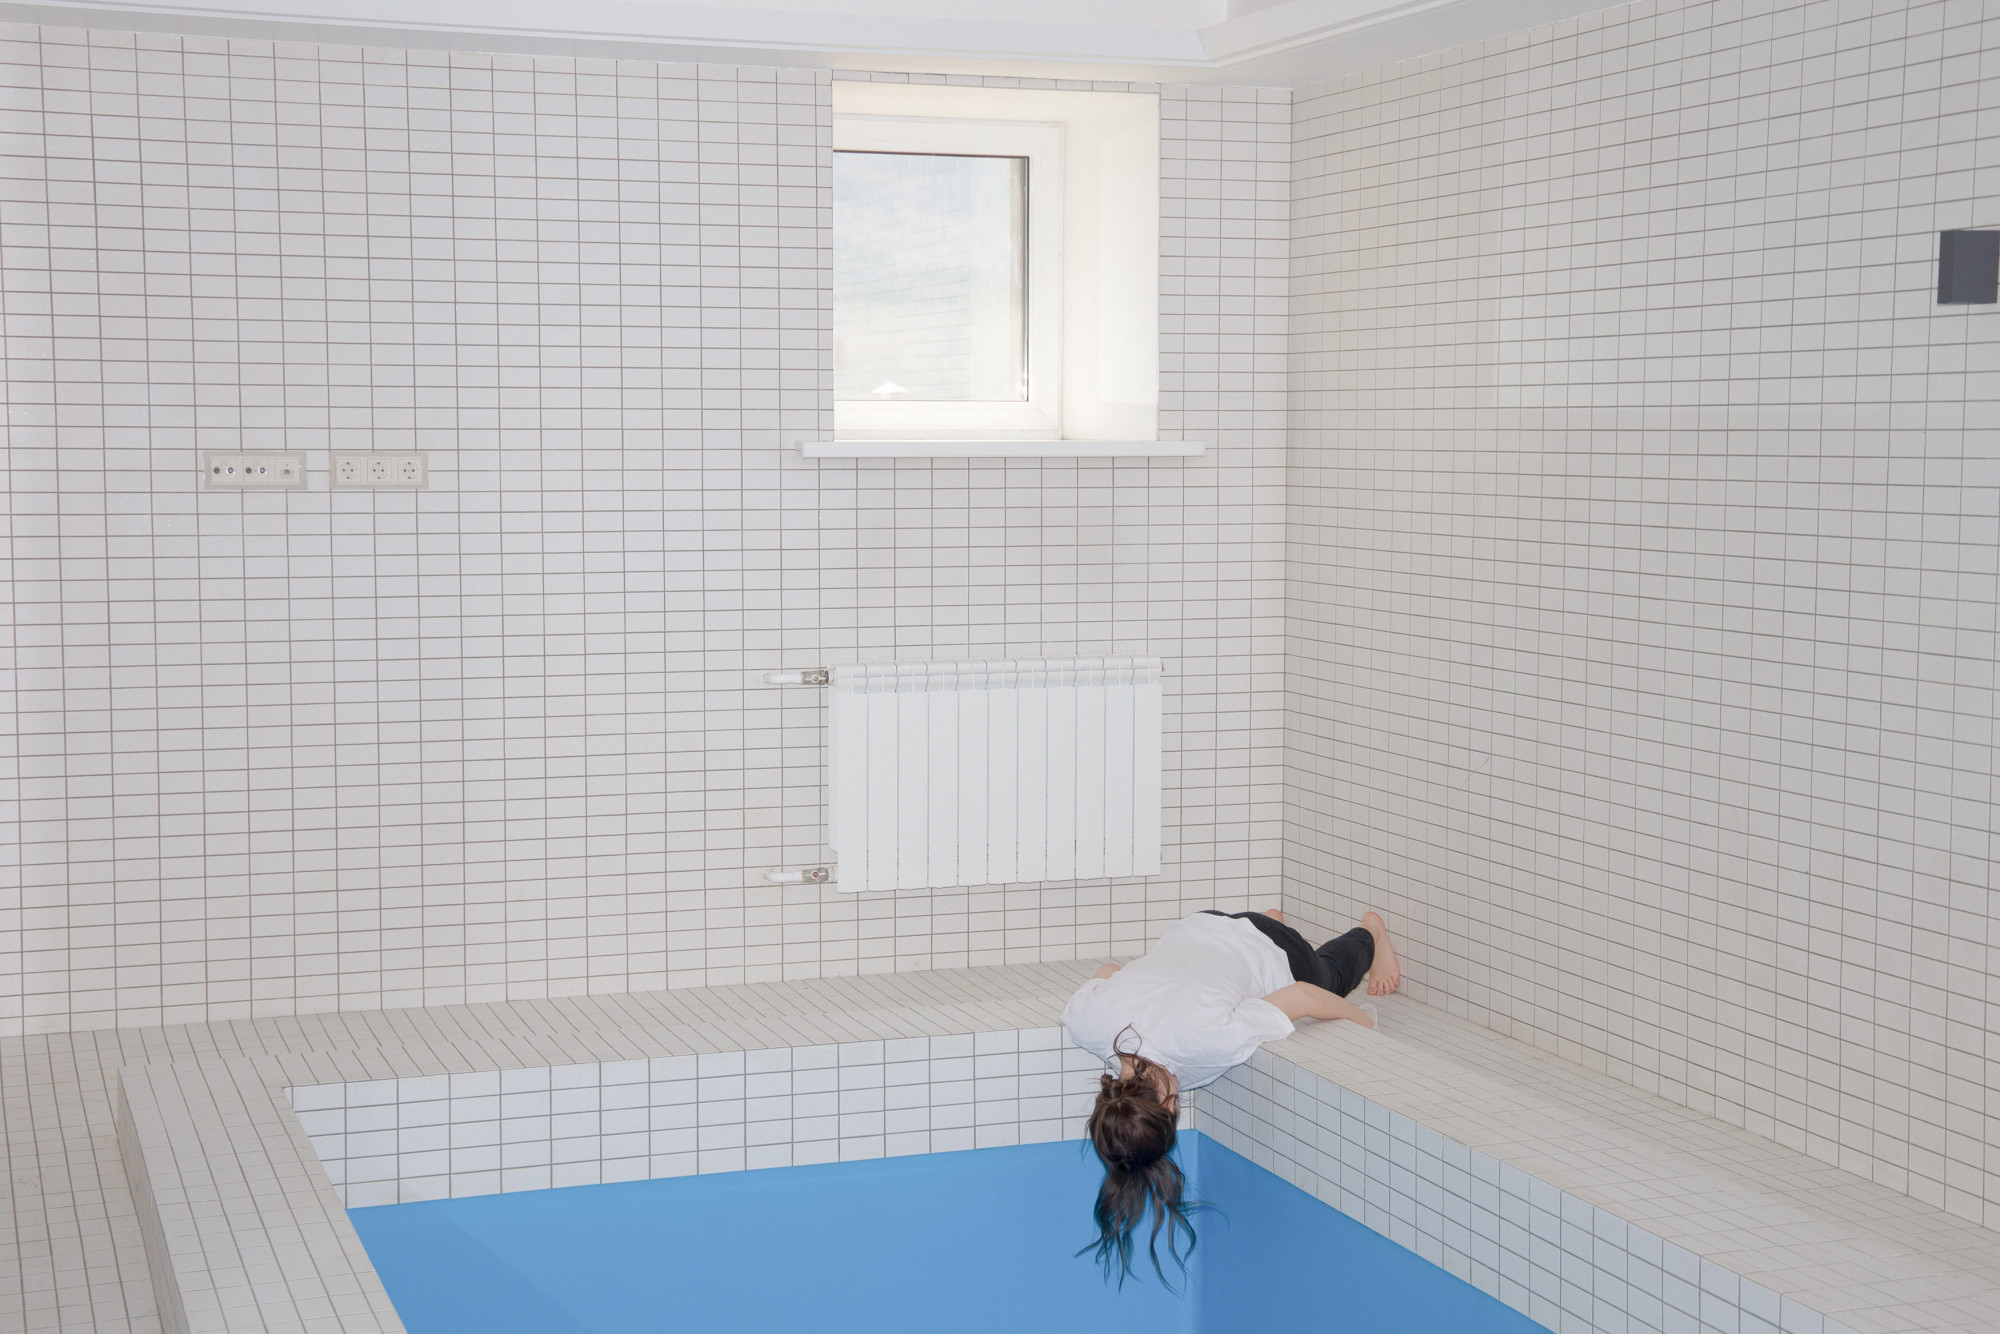 Swimming Pool. Krysha, 2018-2020. Krysha (“roof”) is slang for “protection,”specifically from criminal groups; the project is built around the murder of the local crime boss, who gave such protection to Istomina’s stepfather